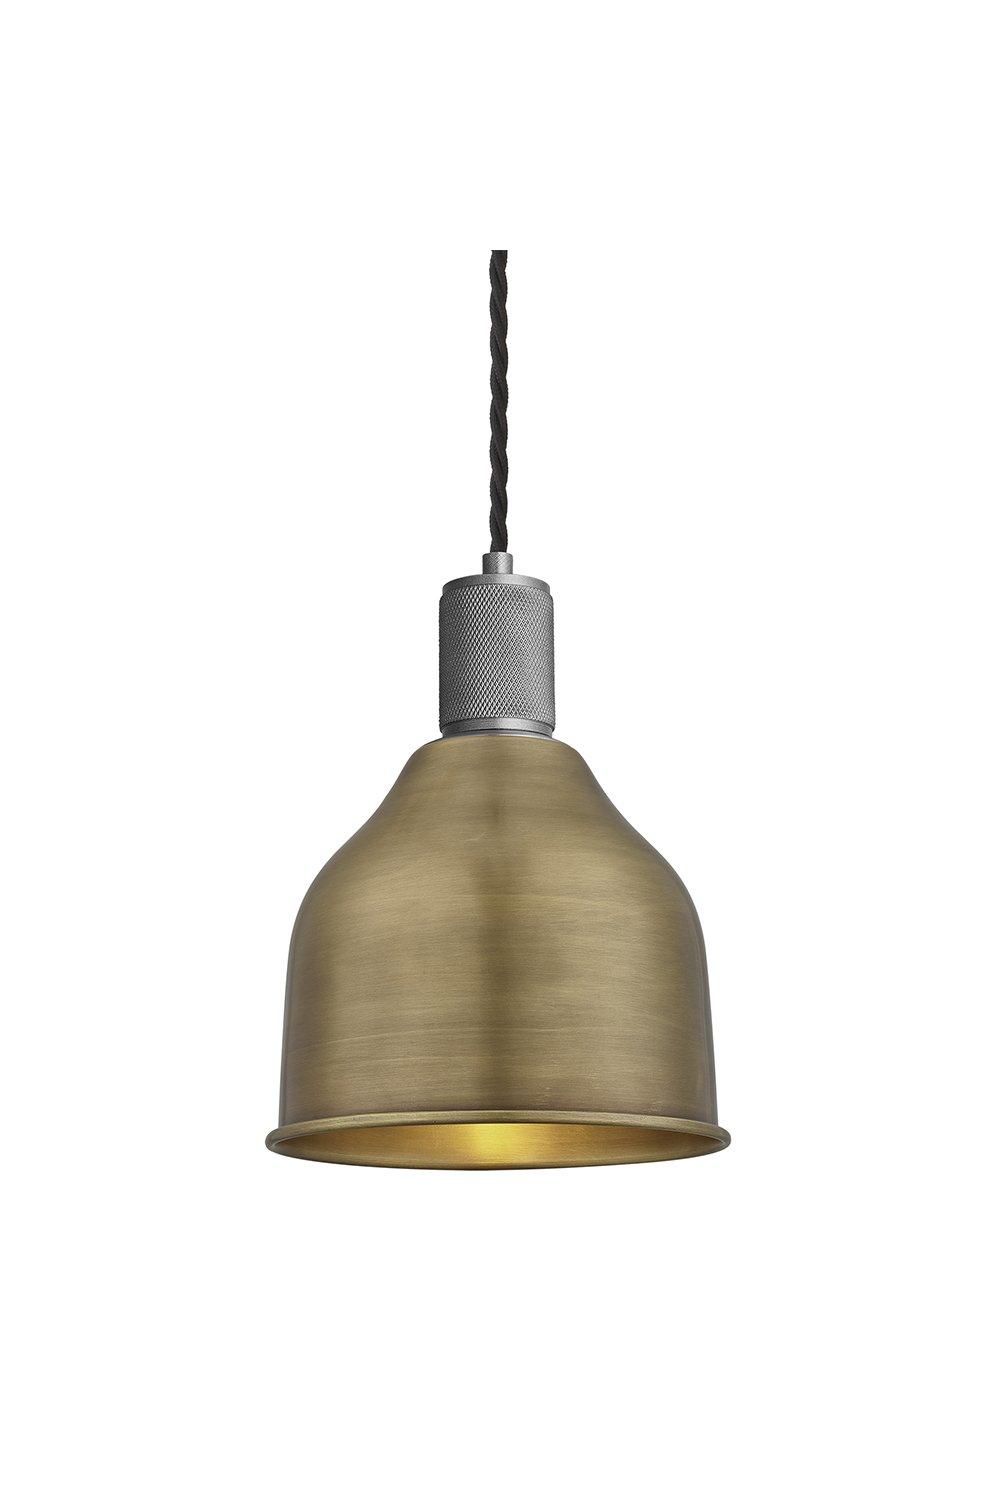 Knurled Cone Pendant Light, 7 Inch, Brass, Pewter Holder